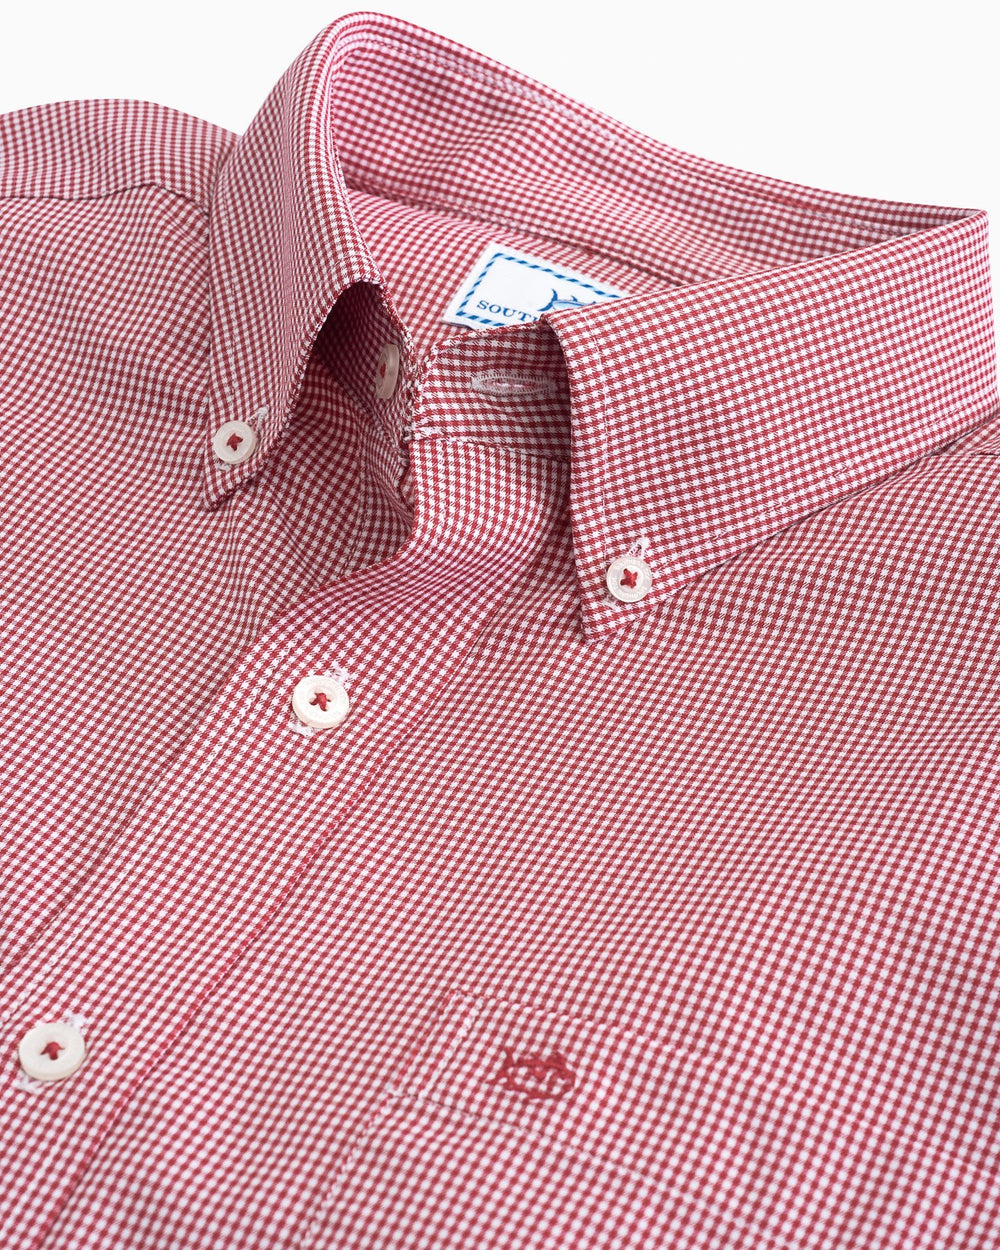 Arm vents of the Men's Red Micro Gingham Intercoastal Performance Sport Shirt by Southern Tide - true red